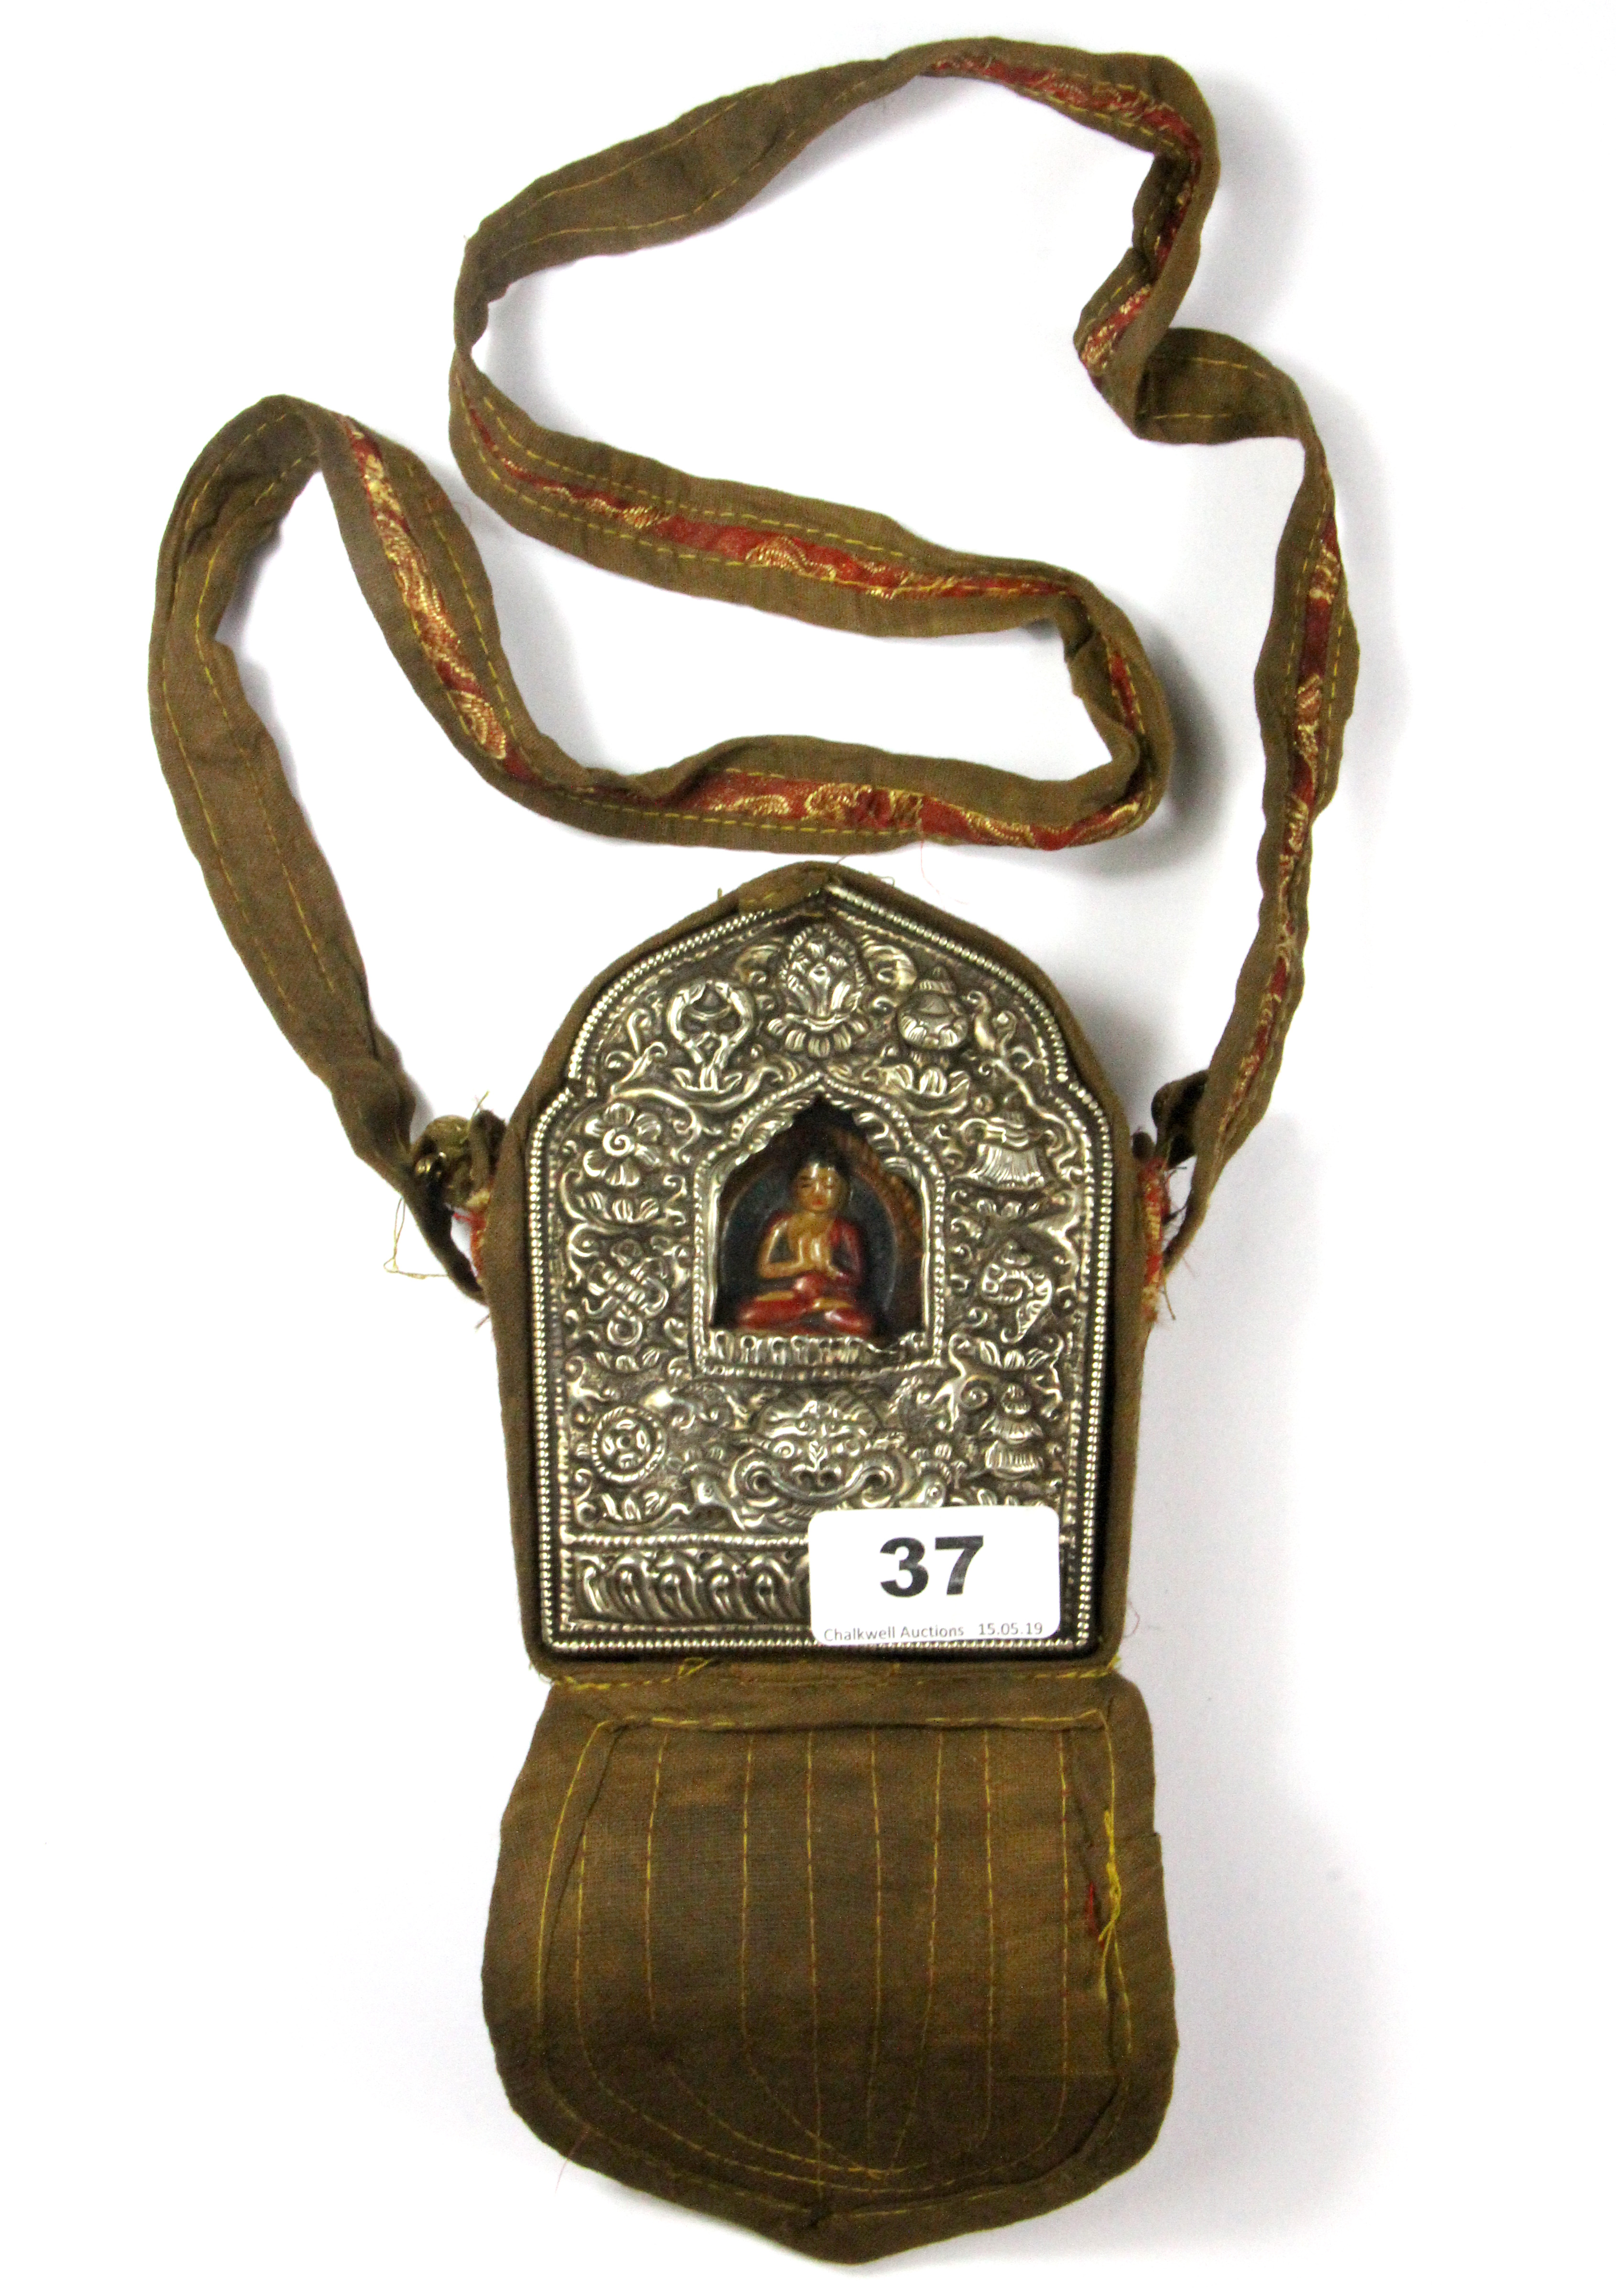 A Tibetan copper and hammered white metal ga'u (portable shrine) inset with a painted clay figure of